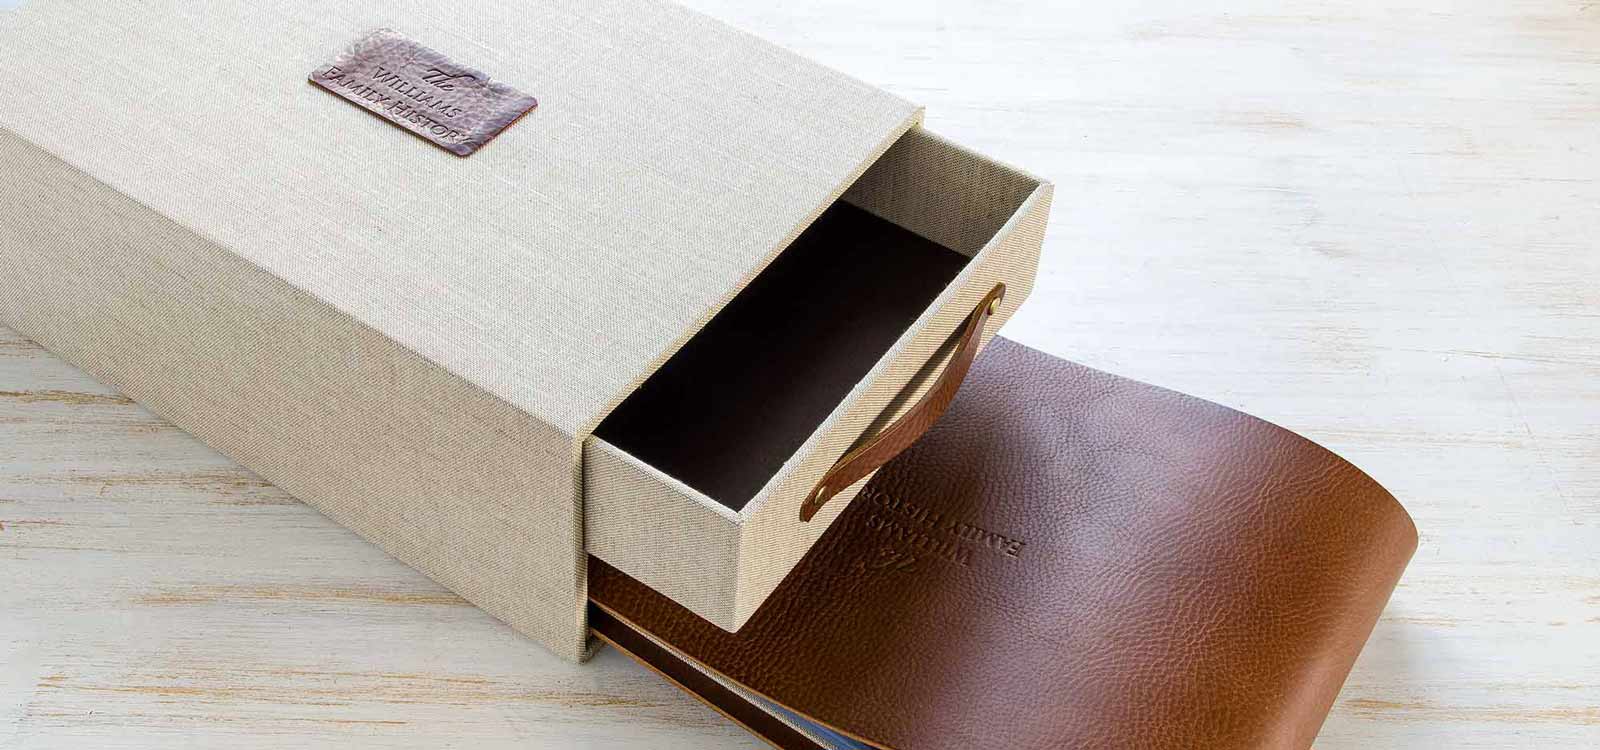 custom keepsake box memory box or project box with sliding drawer and leather album